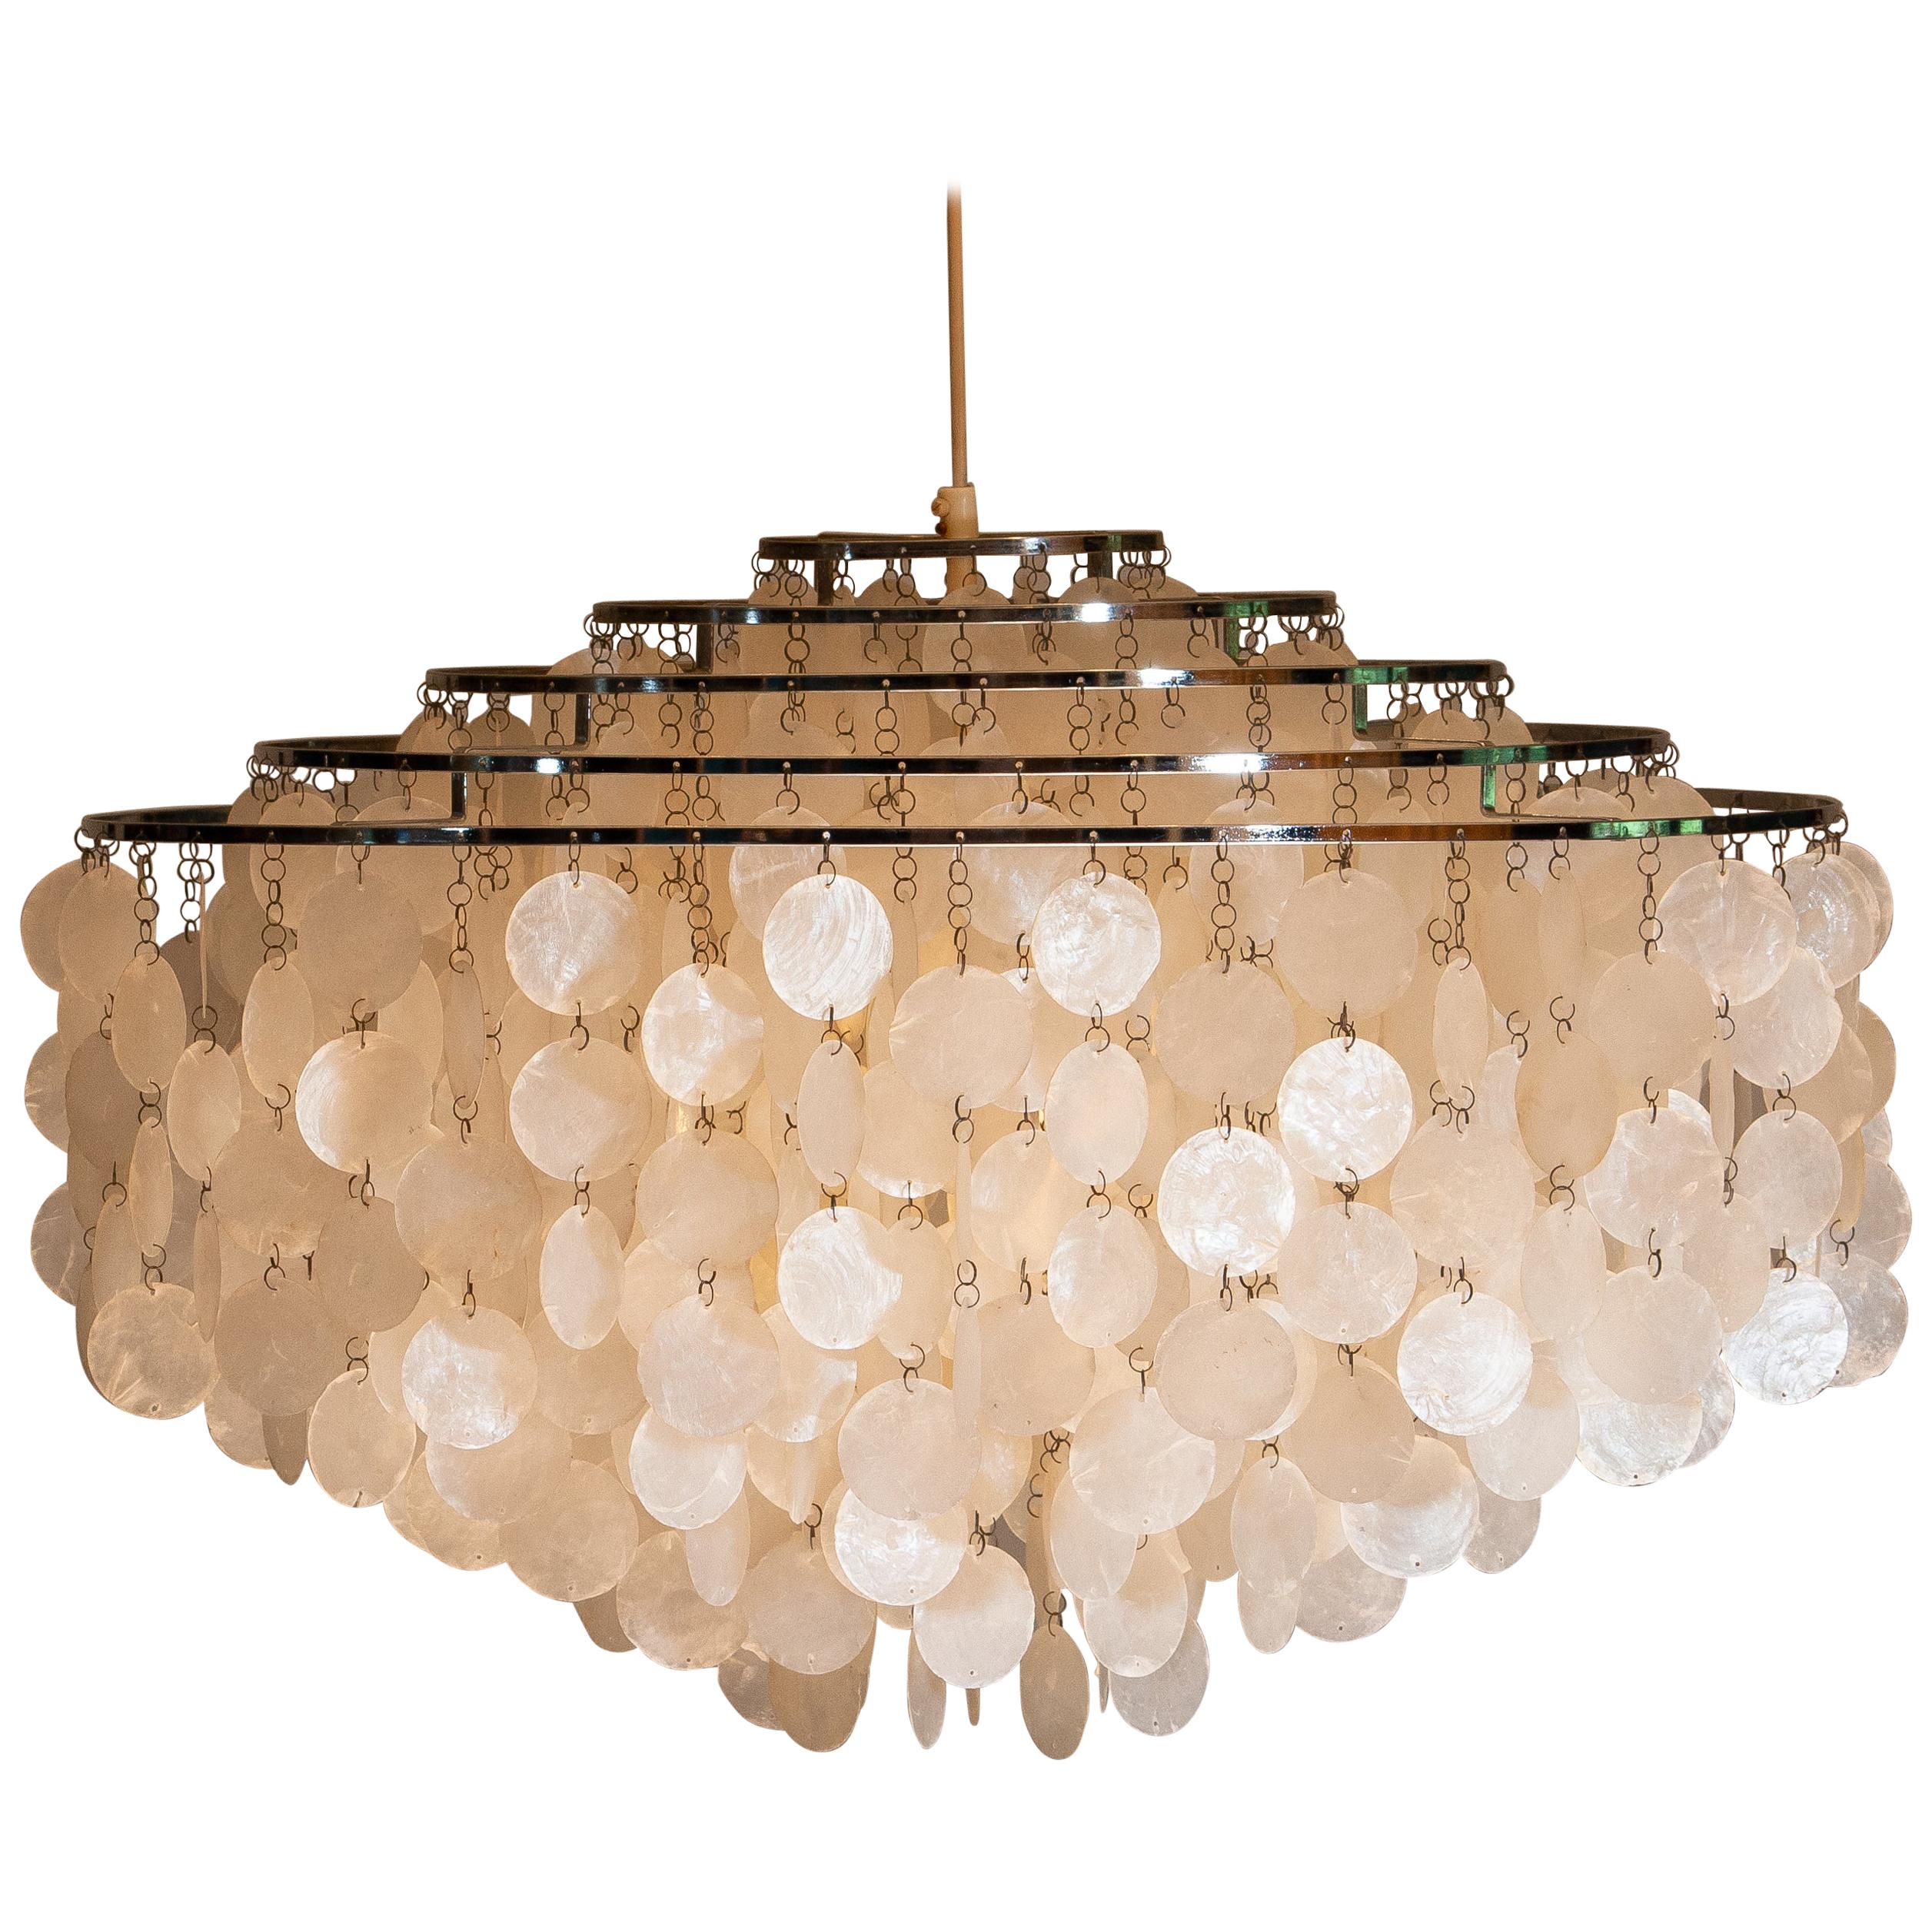 1960s Extra Large Capiz Shell Chandelier by Verner Panton for Luber AG. Swiss